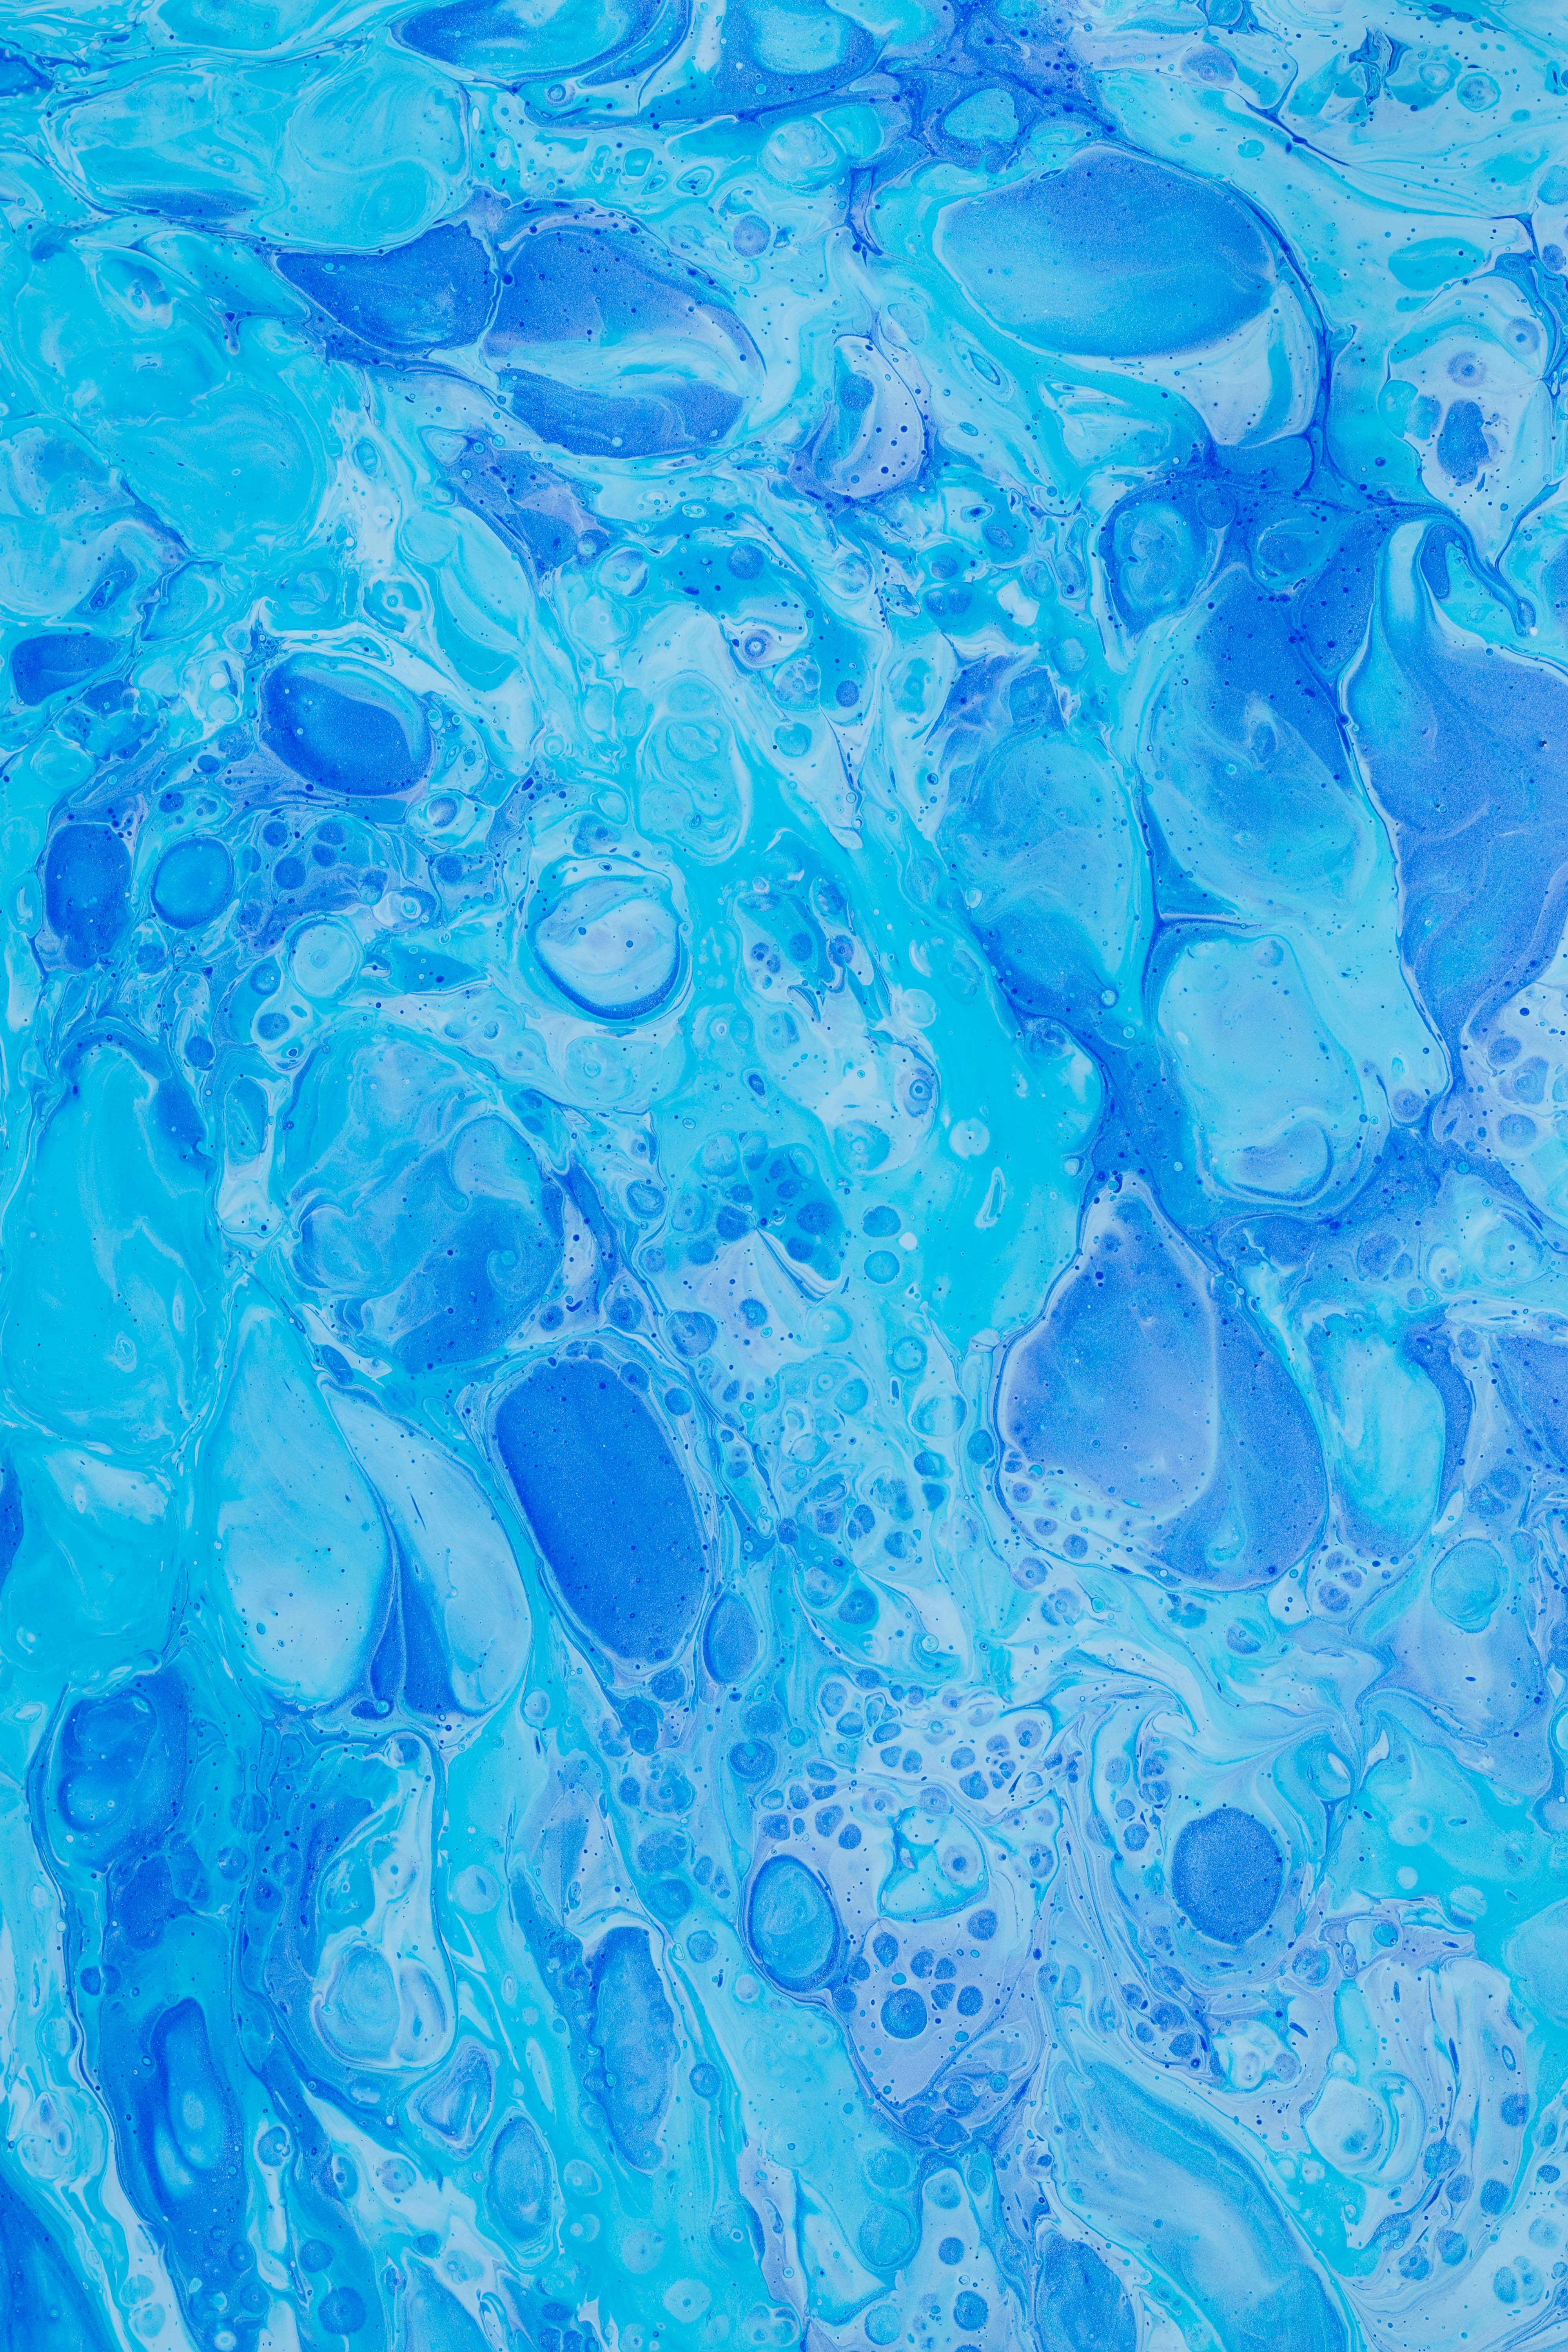 abstract, paint, blue, watercolor, stains, spots Full HD